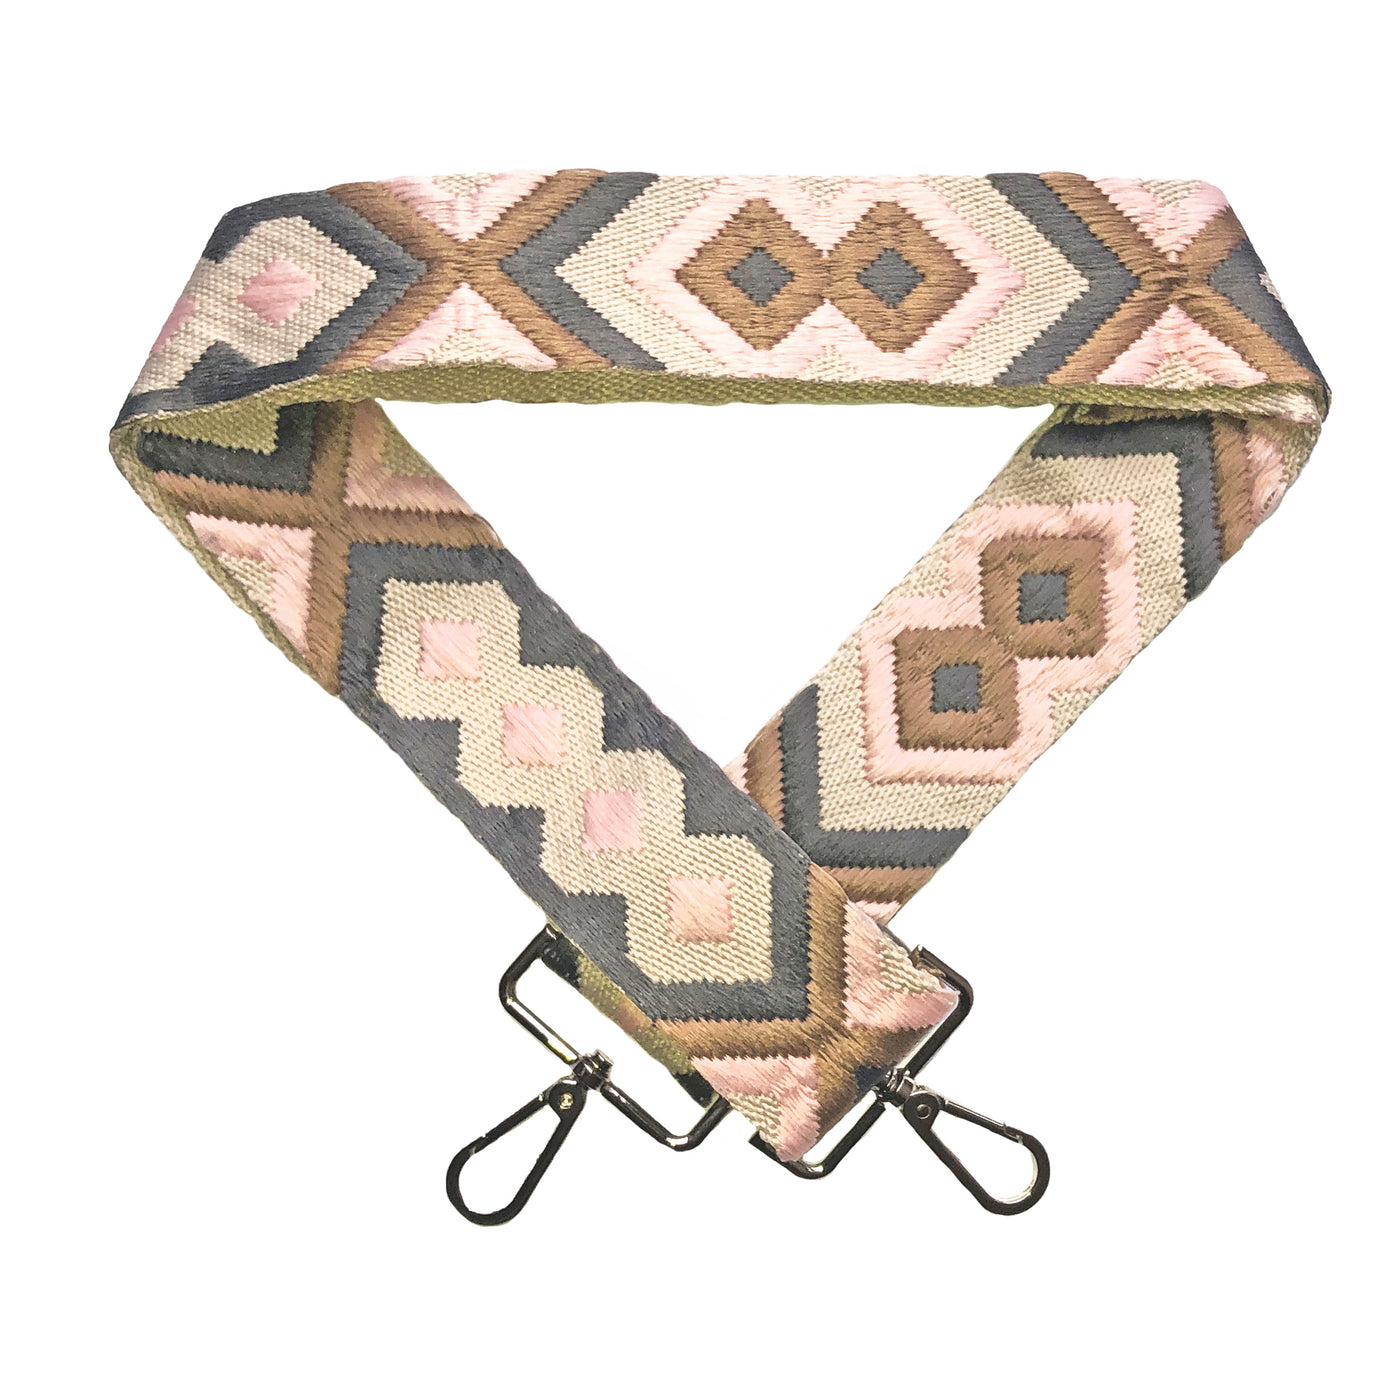 A grey, pink, brown and beige geometric patterned woven messenger strap with sliver-colored buckles, shown laying on a plain white background.